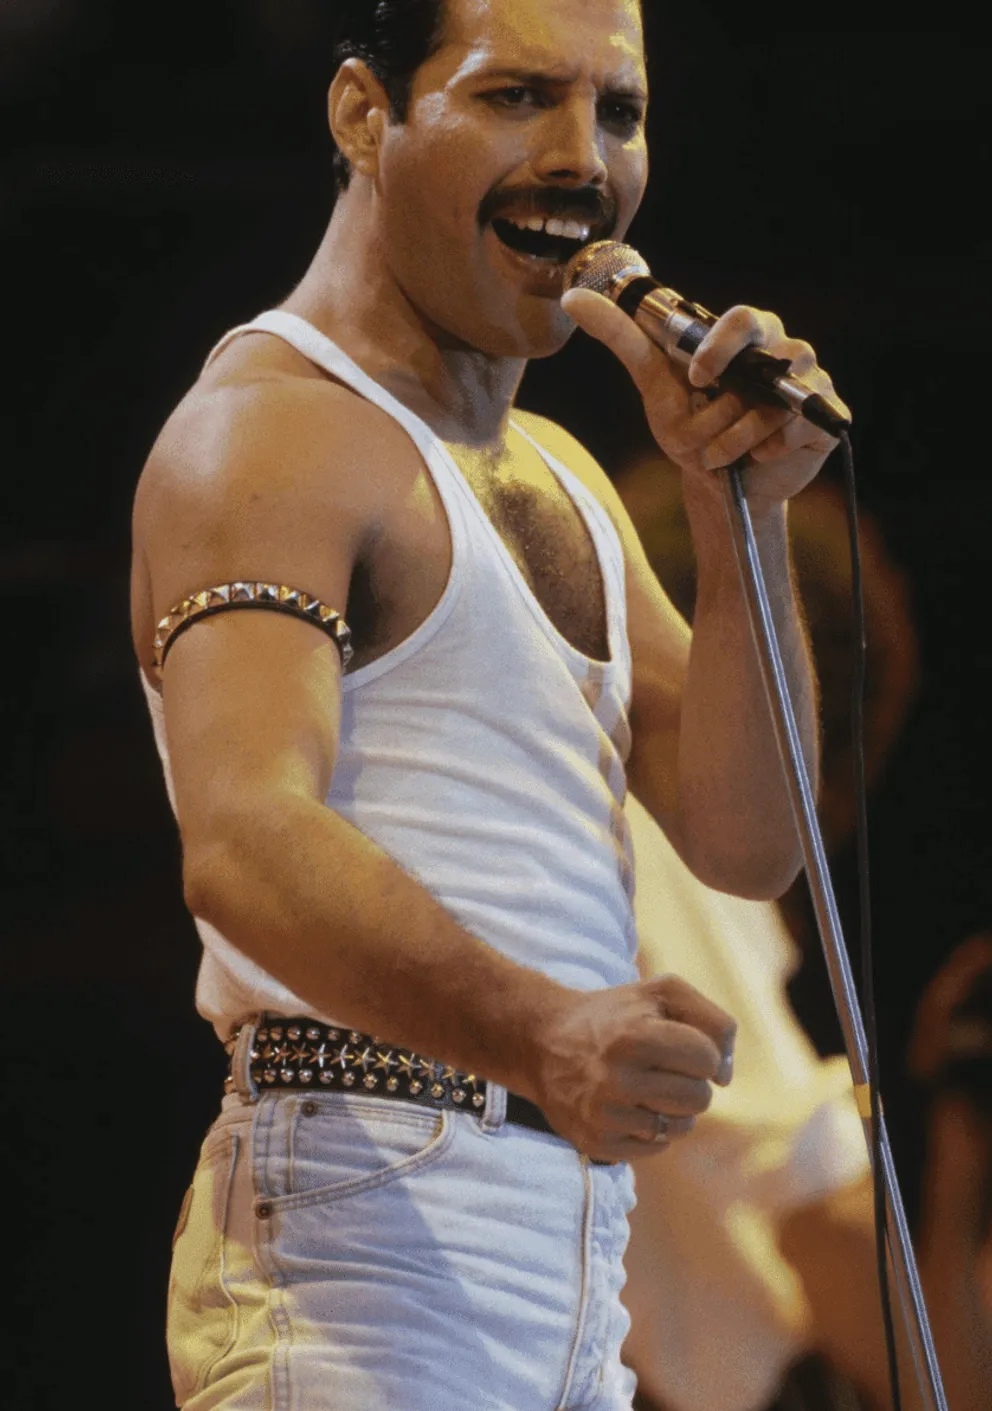  Singer Freddie Mercury of Queen performs during Live Aid at Wembley Stadium on 13 July 1985. | Photo: Getty Images